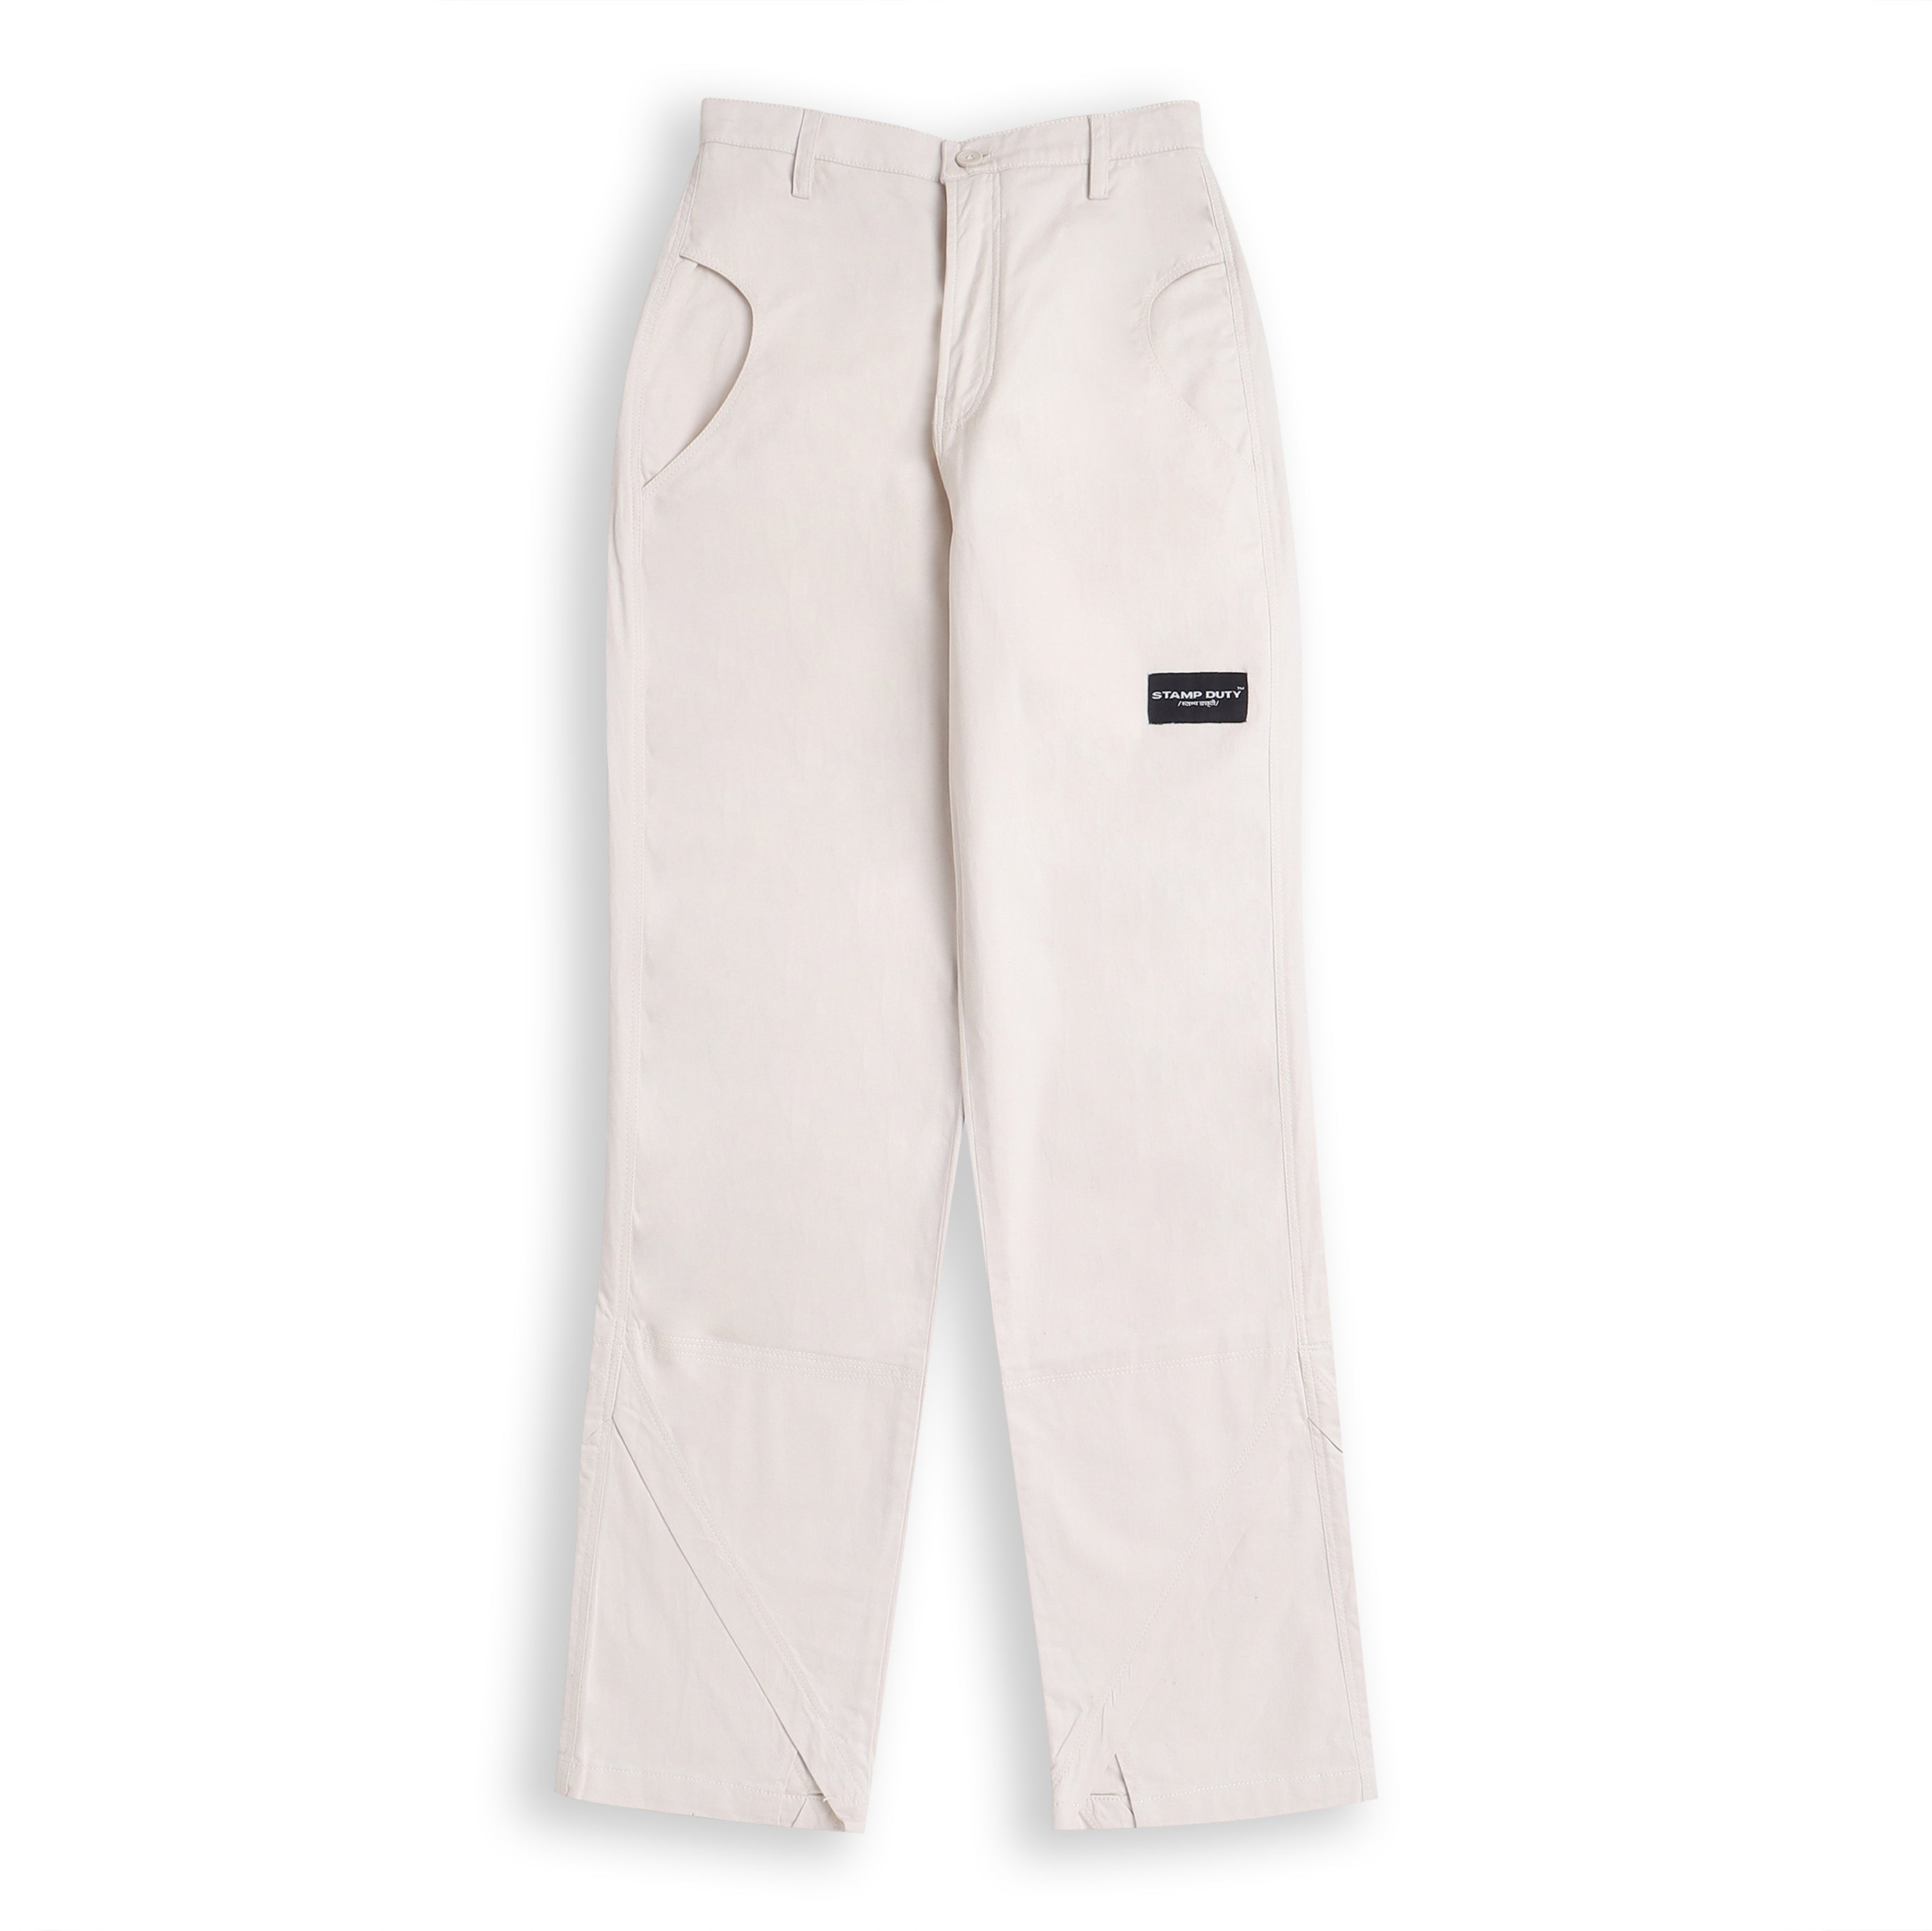 Classic Beige Work Trousers by Dickies